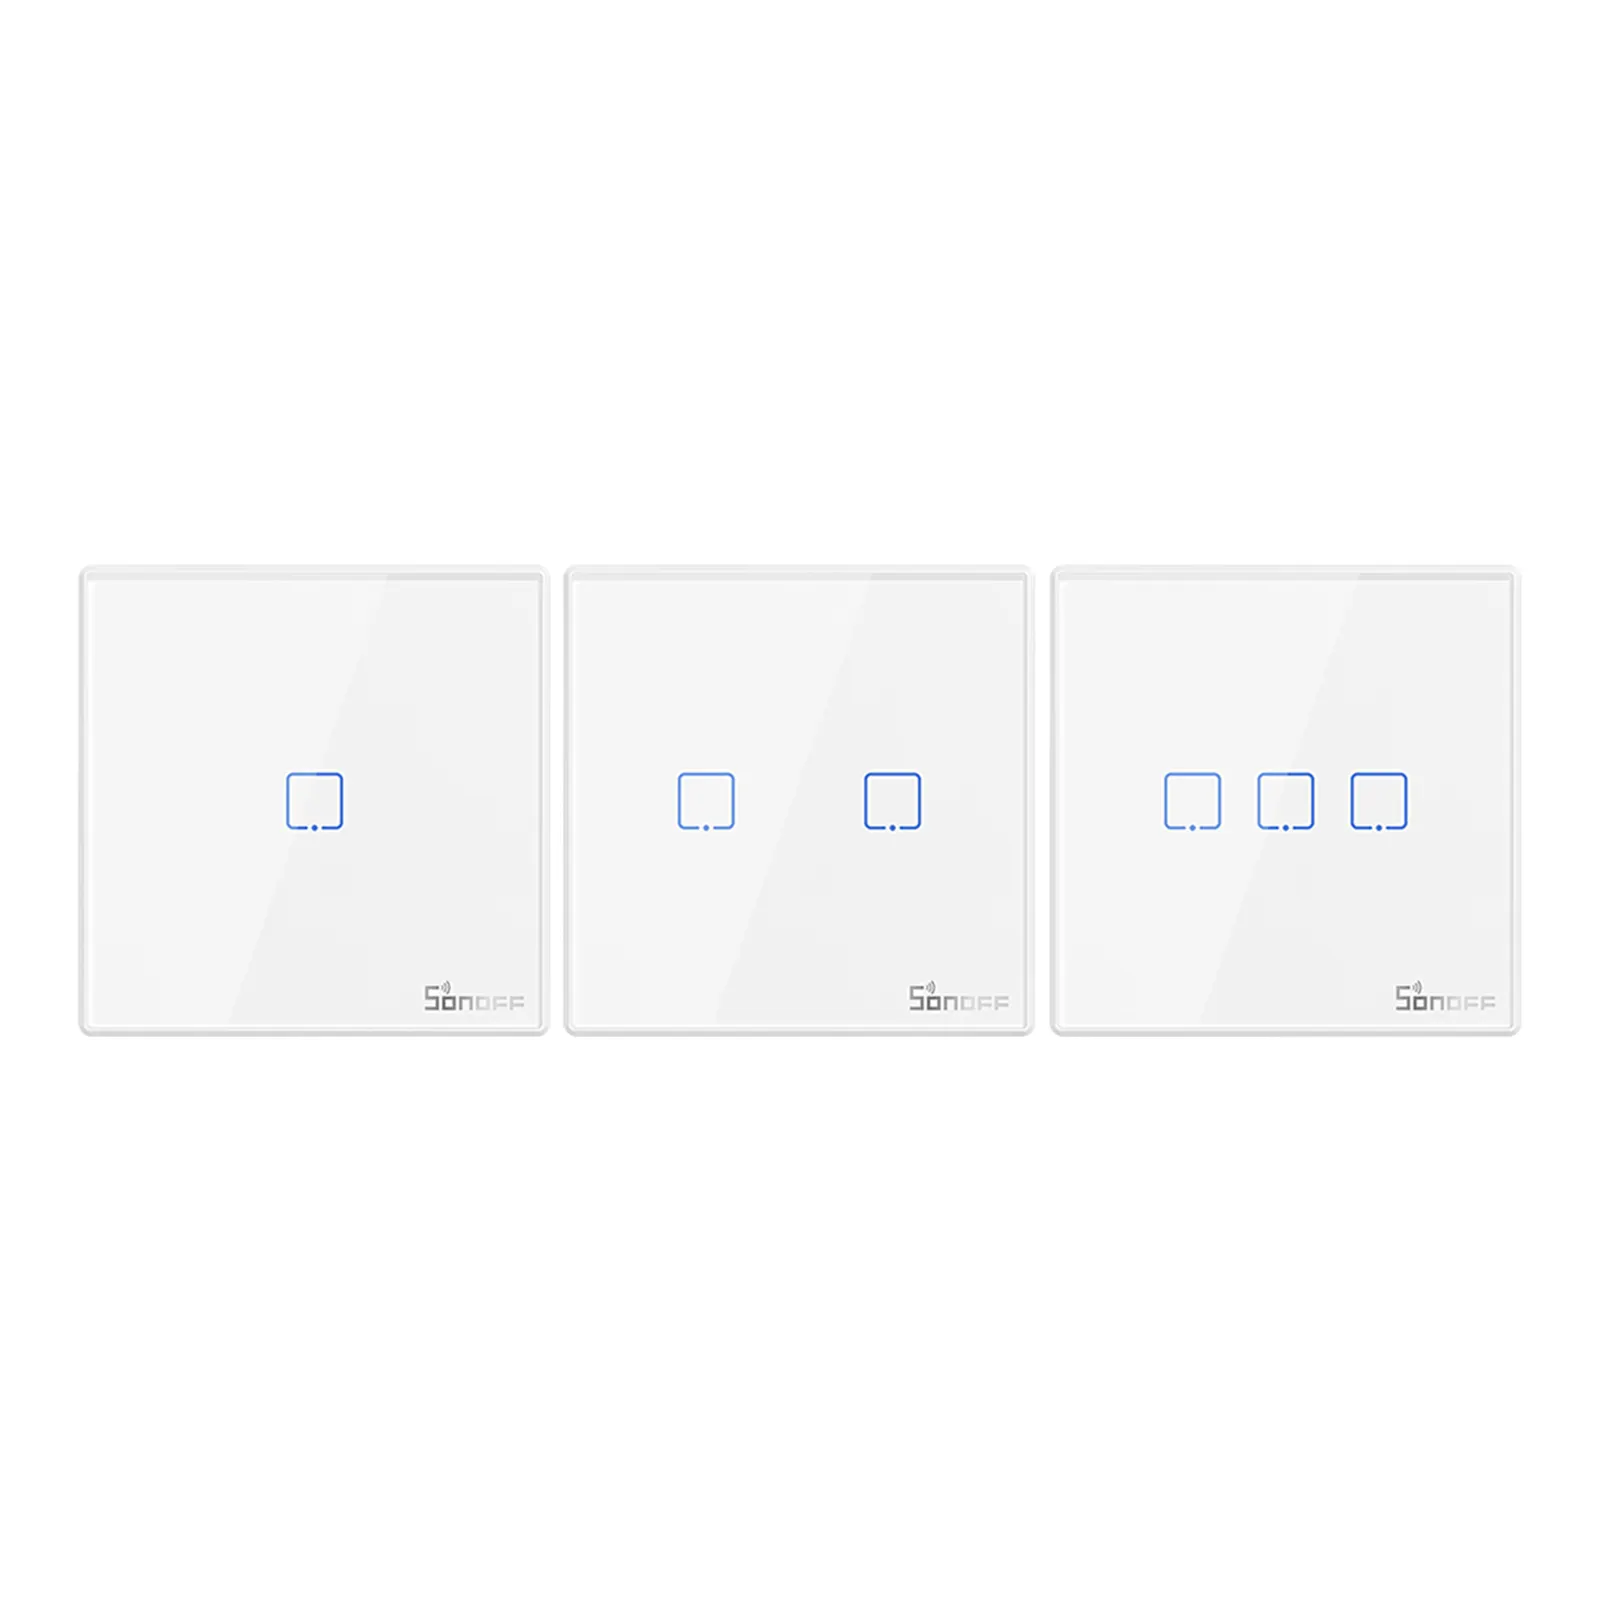 Sonoff T2EU-RF 86 Type Wall Panel Sticky 433Mhz Wireless RF Remote Control 2-Way Control For Sonoff TX Series 4CHPROR3 RFR2